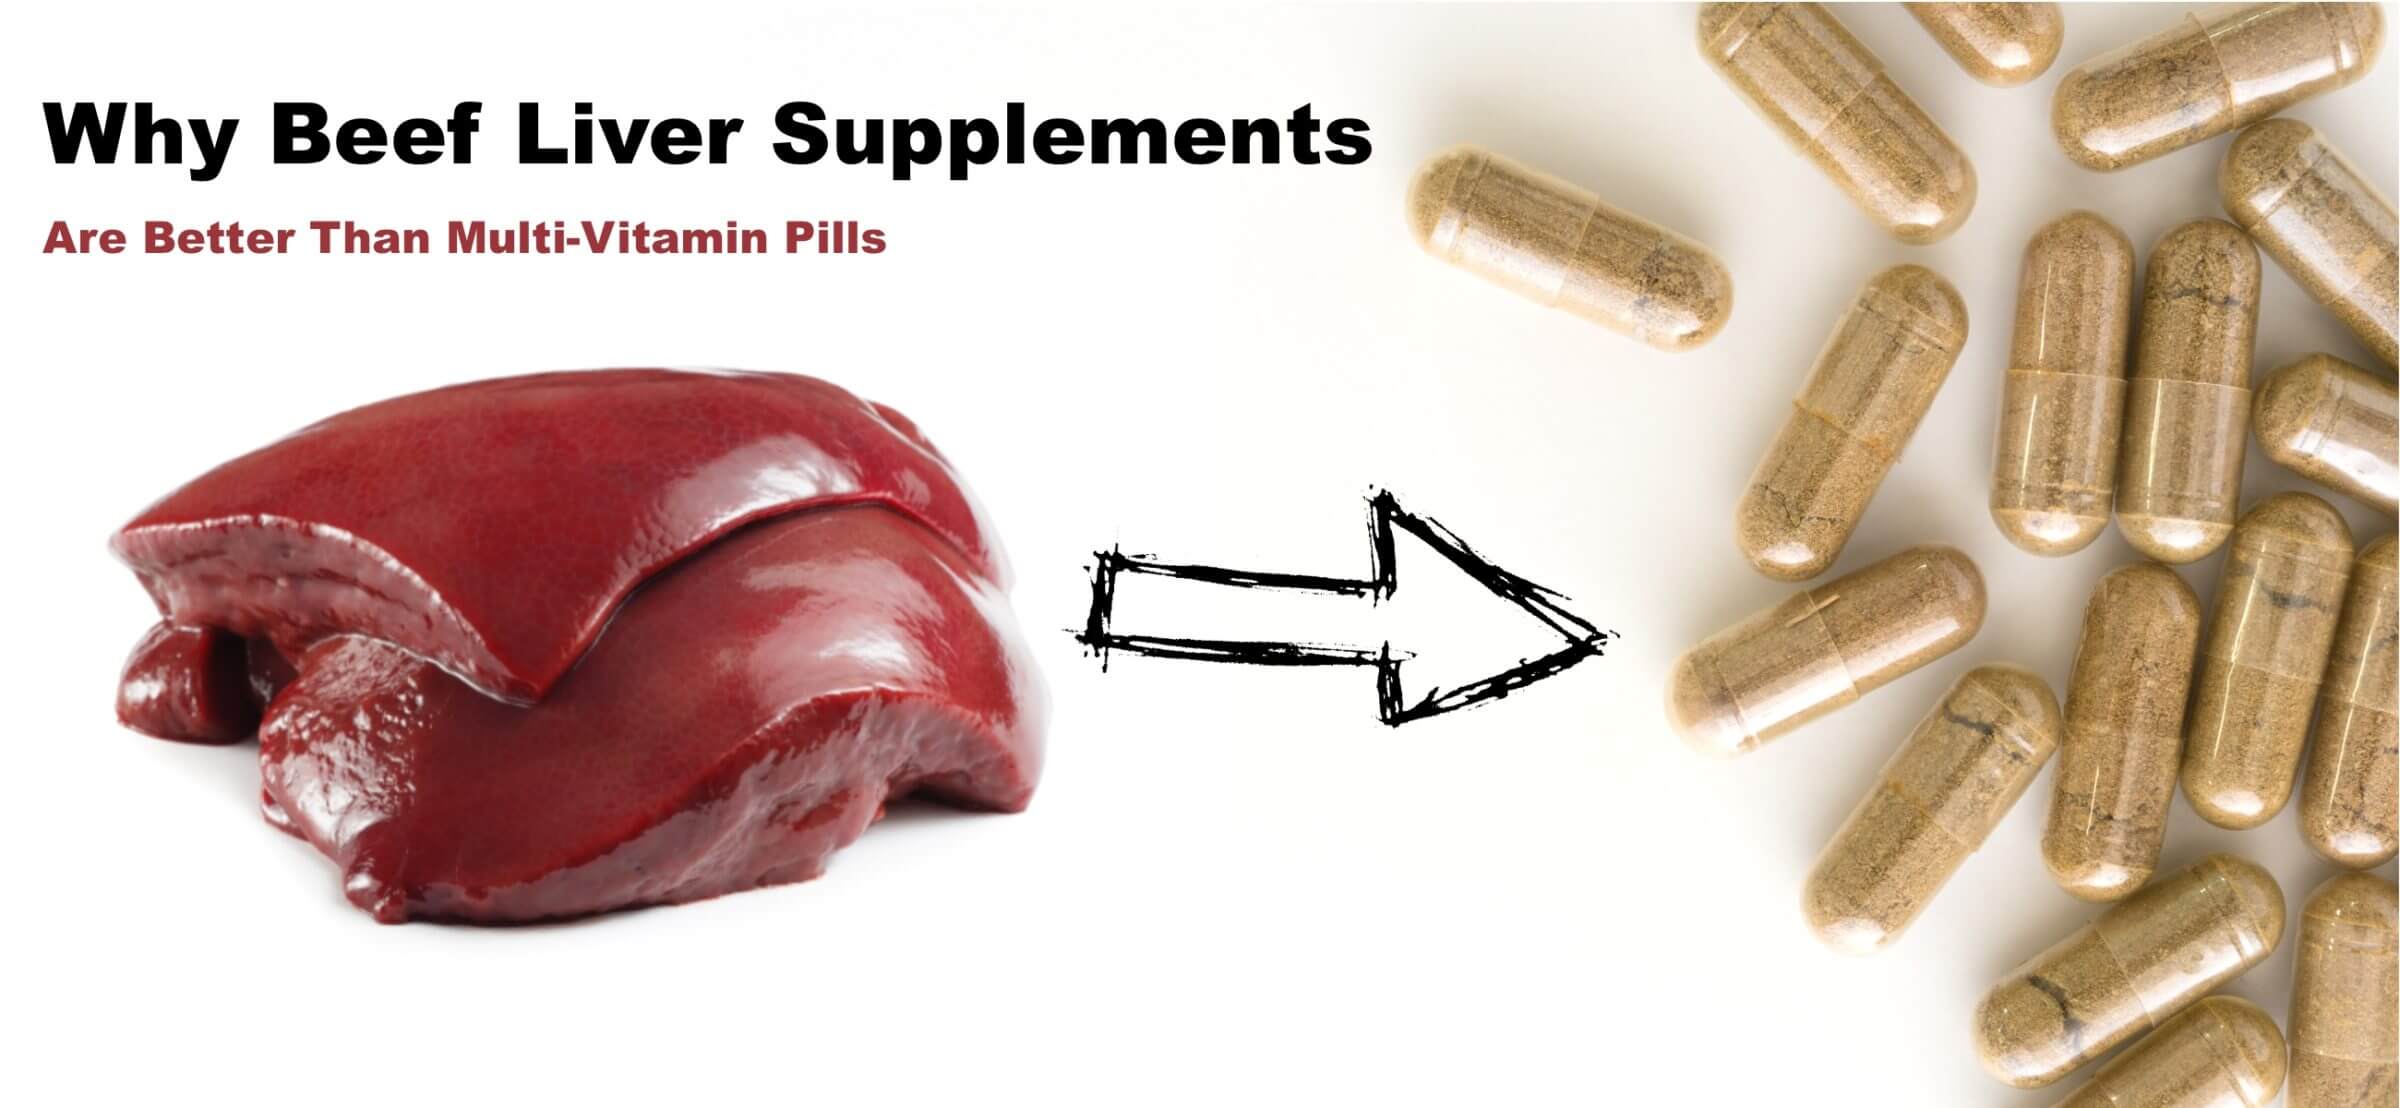 Top 4 Top Beef Liver Supplements (Grass-Fed, Desiccated, Non-Defatted)